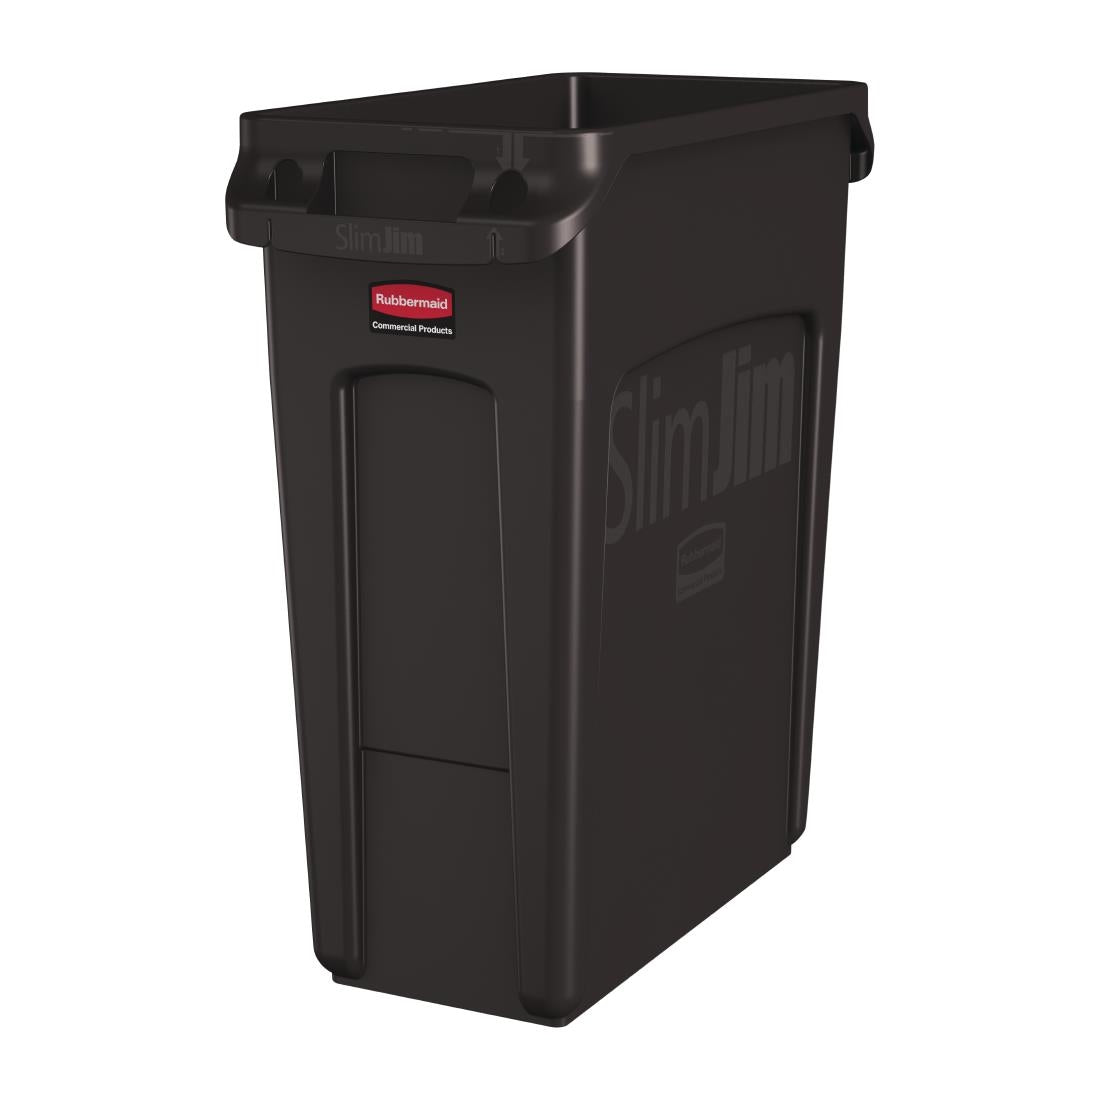 DY113 Rubbermaid Slim Jim Container With Venting Channels Brown 60Ltr JD Catering Equipment Solutions Ltd